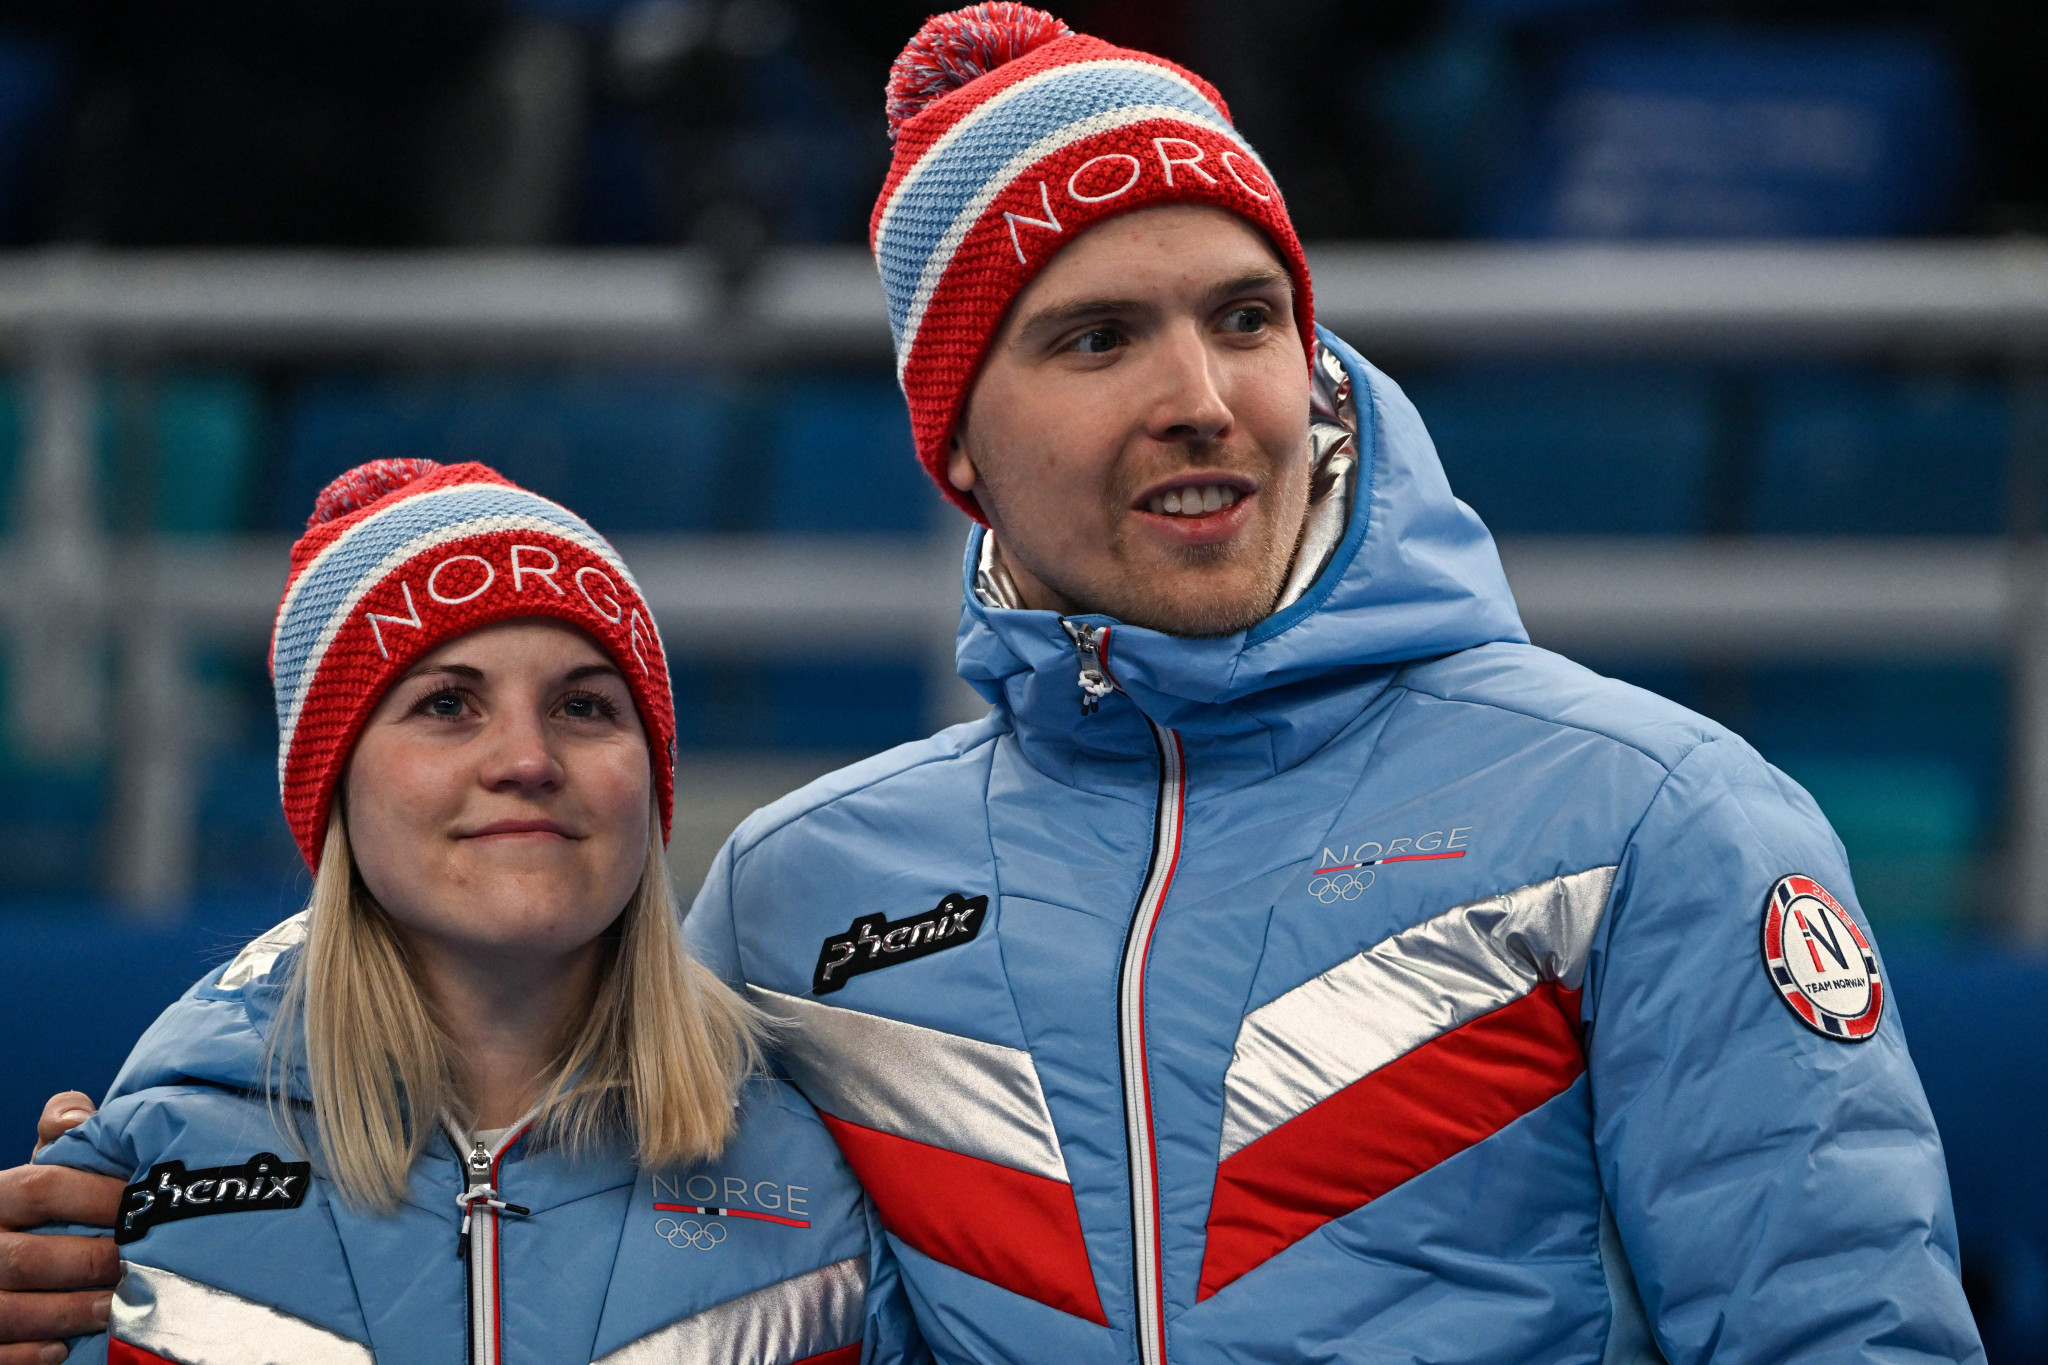 Italy win first Olympic curling gold in Beijing 2022 mixed doubles